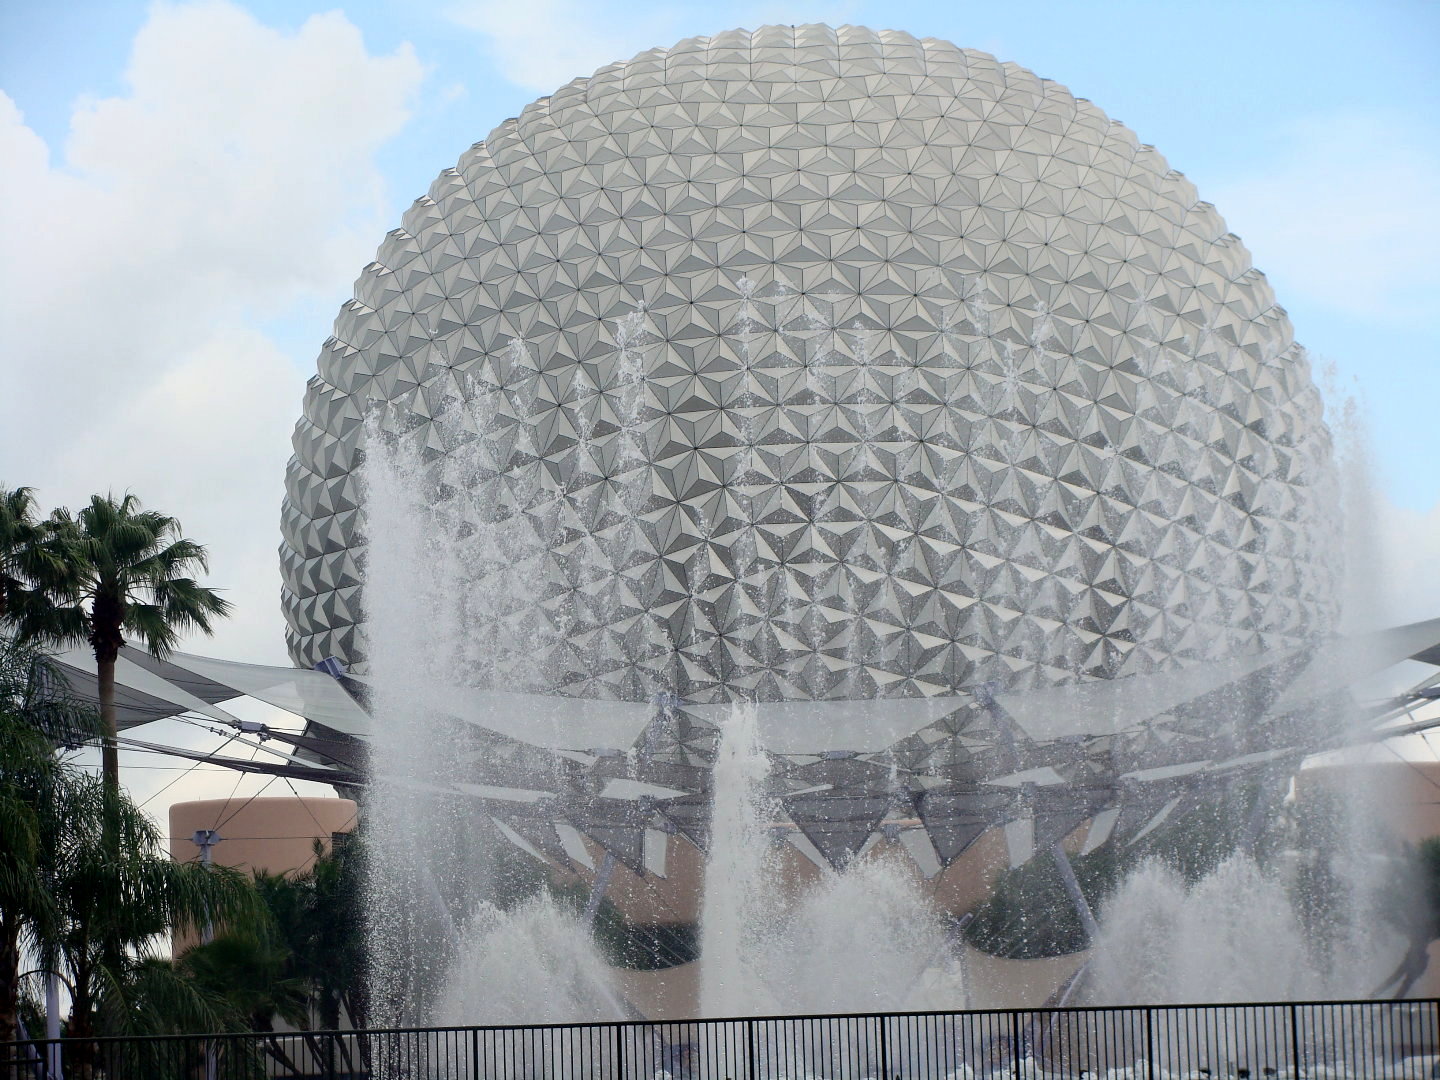 Spaceship Earth and Fountain of Nations